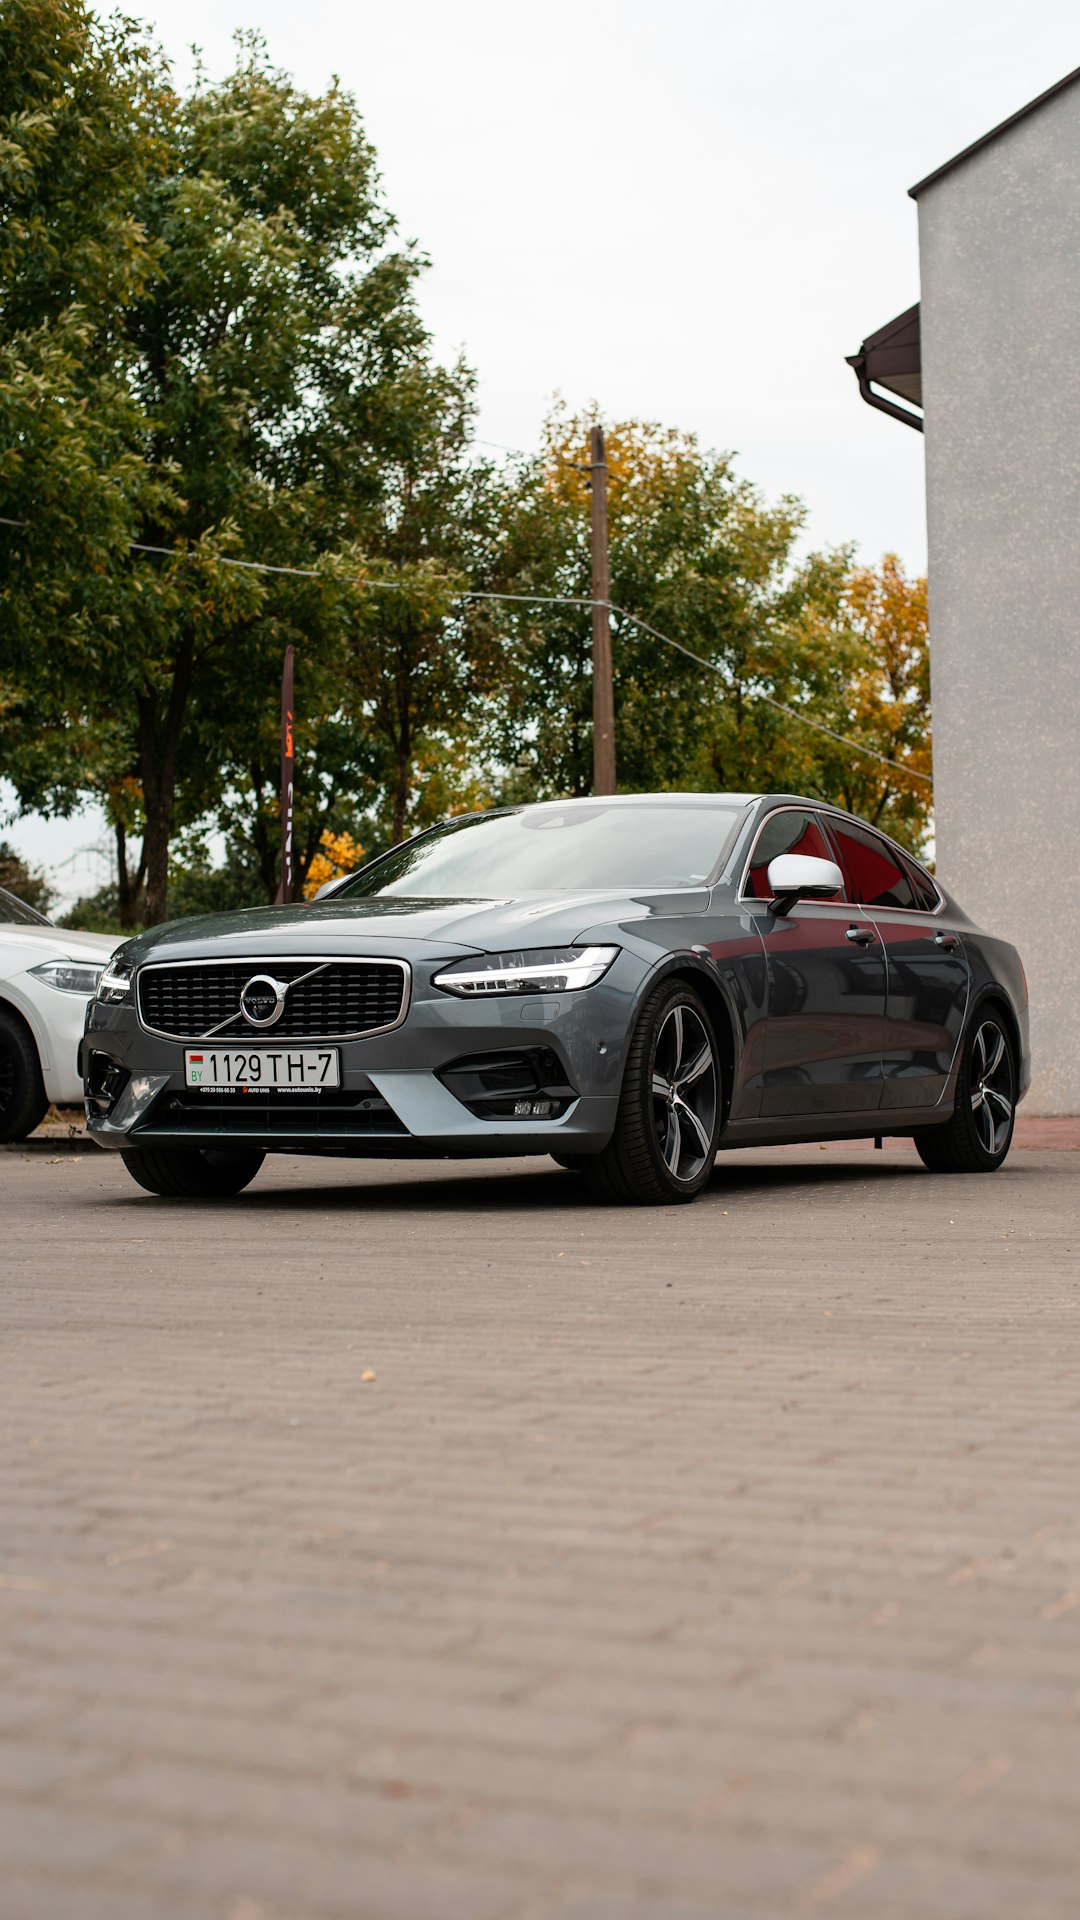 The Volvo S90 is a luxurious sedan that combines elegant design with advanced safety features and a comfortable driving experience.